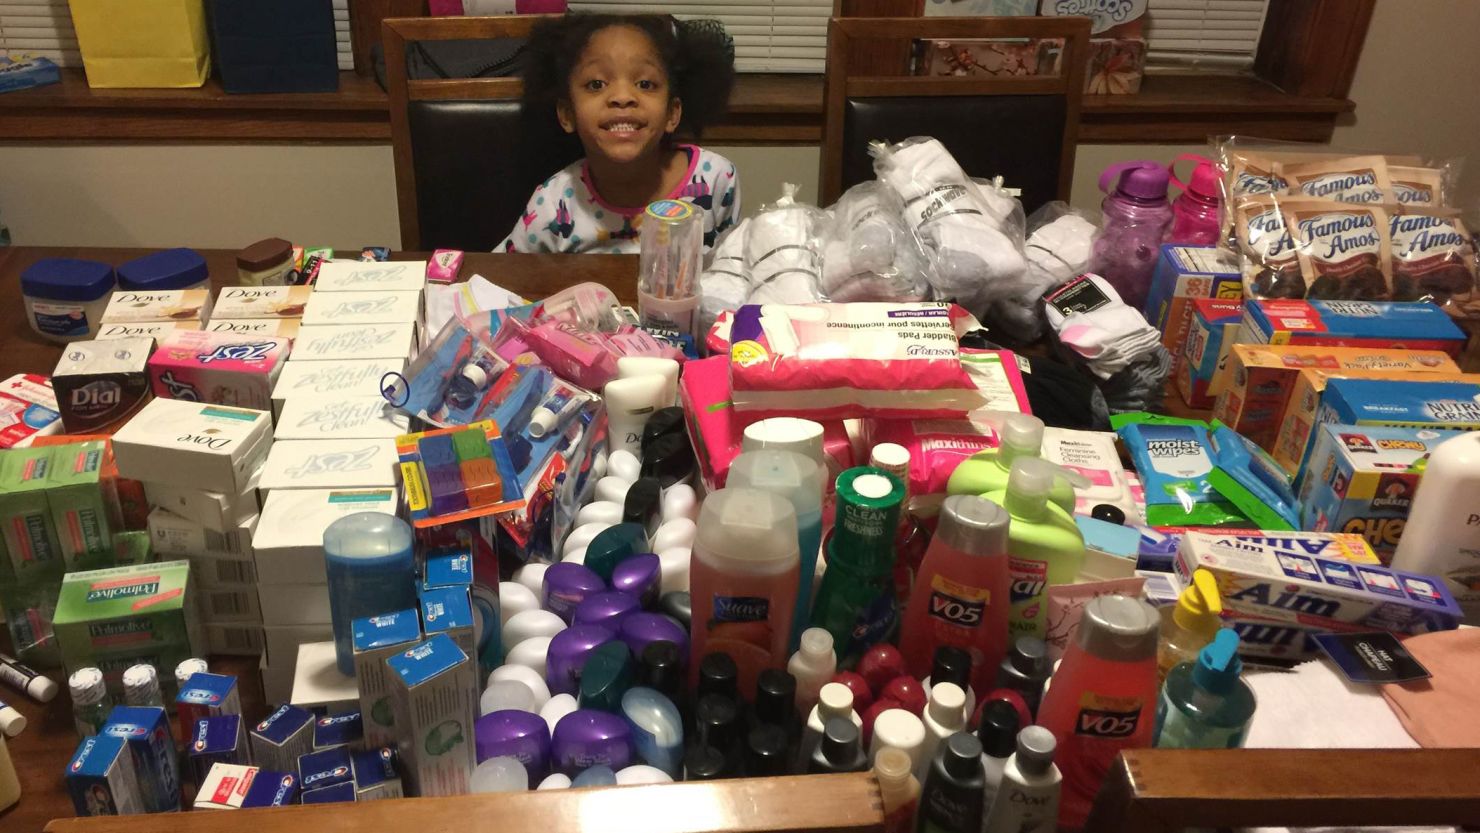 Armani Crews prepares care packages with donated toiletries for a food drive for the homeless on her 6th birthday.